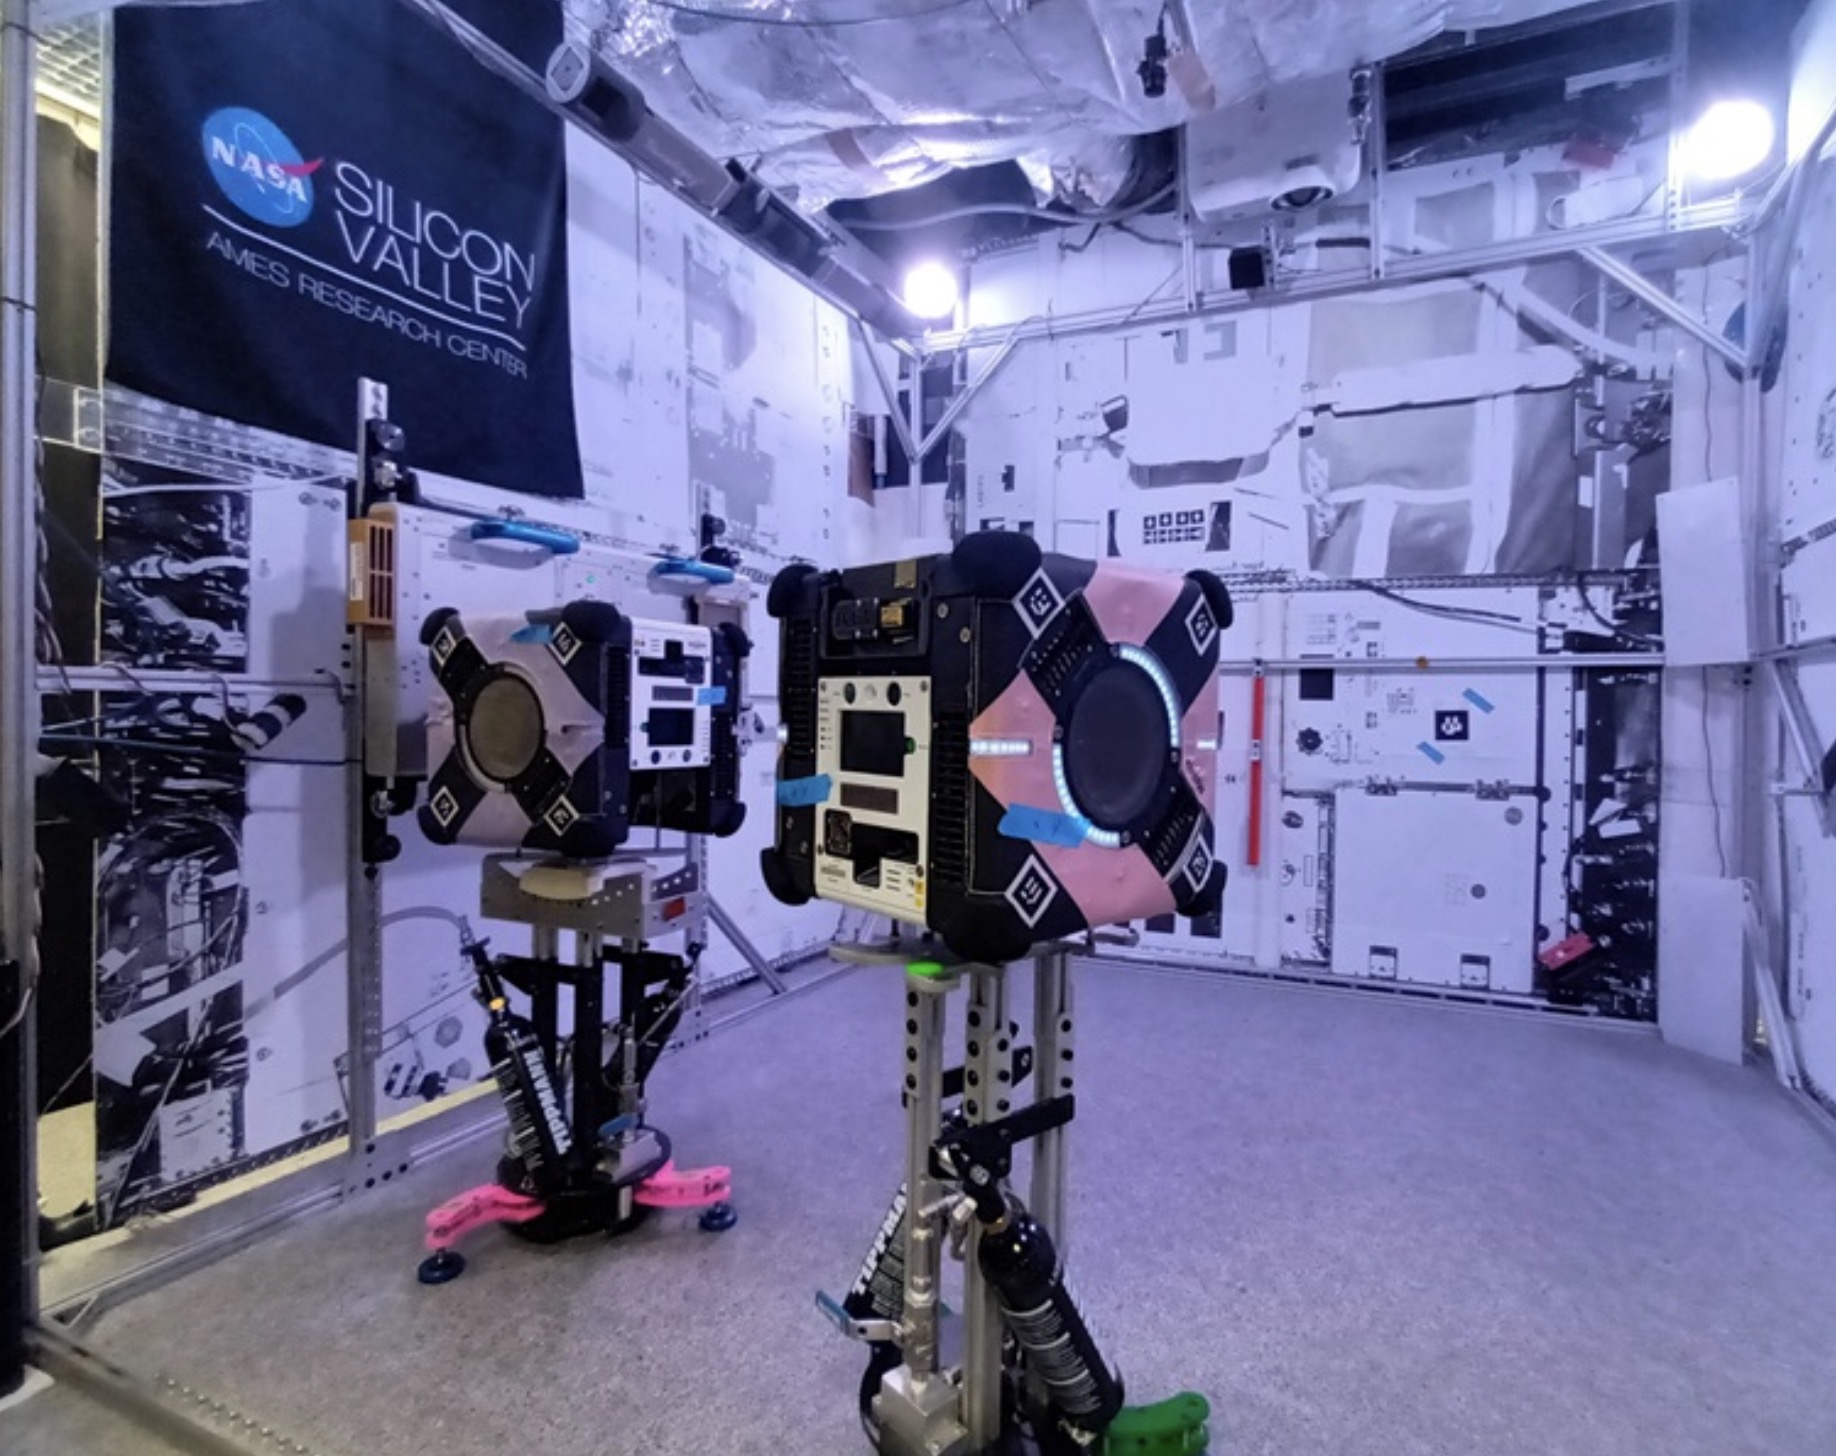 Commonwealth Scientific and Industrial Research Organisation's multi-resolution scanning payload attached to an Astrobee robot platform in a simulated International Space Station environment at NASA Ames Research Center. /CSIRO